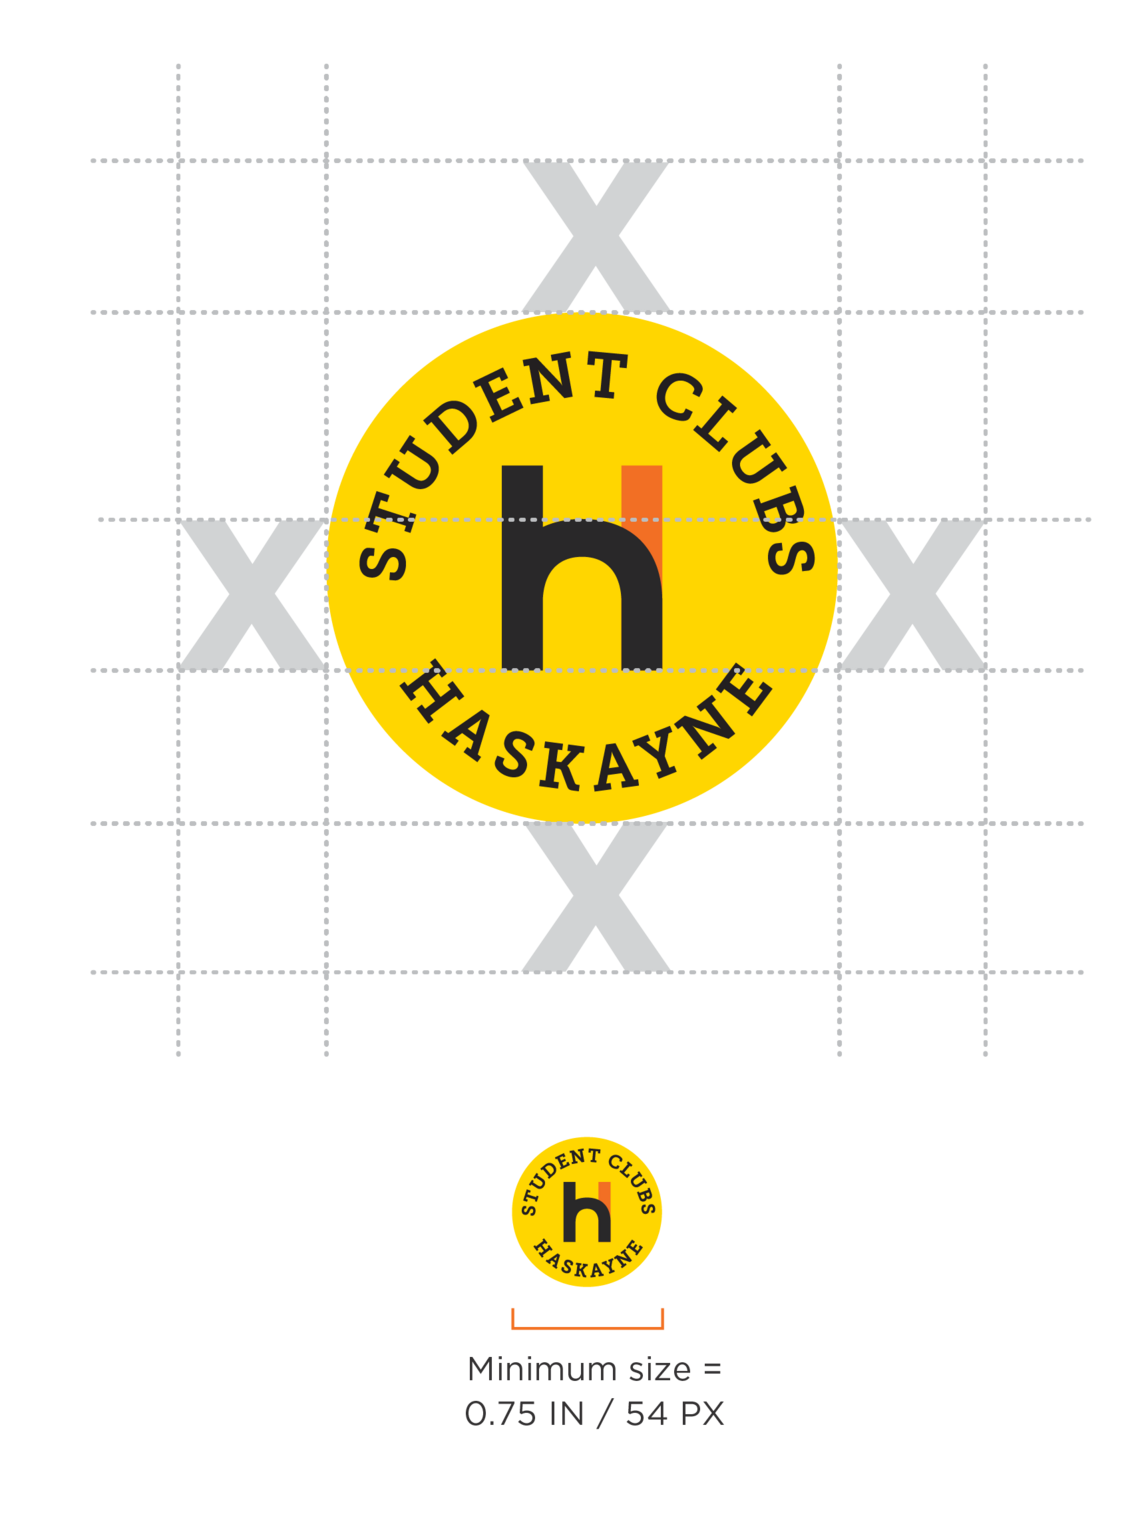 Haskayne student club logo with colour spacing guideline